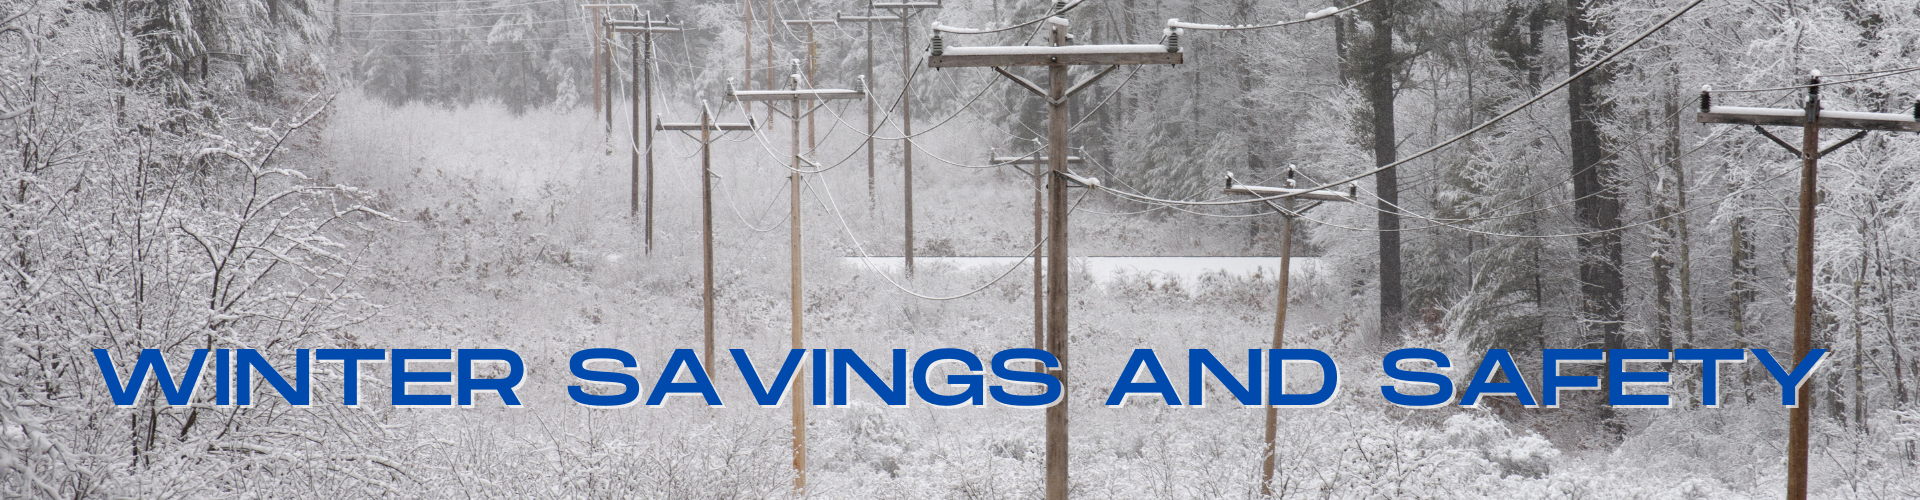 Winter savings and safety